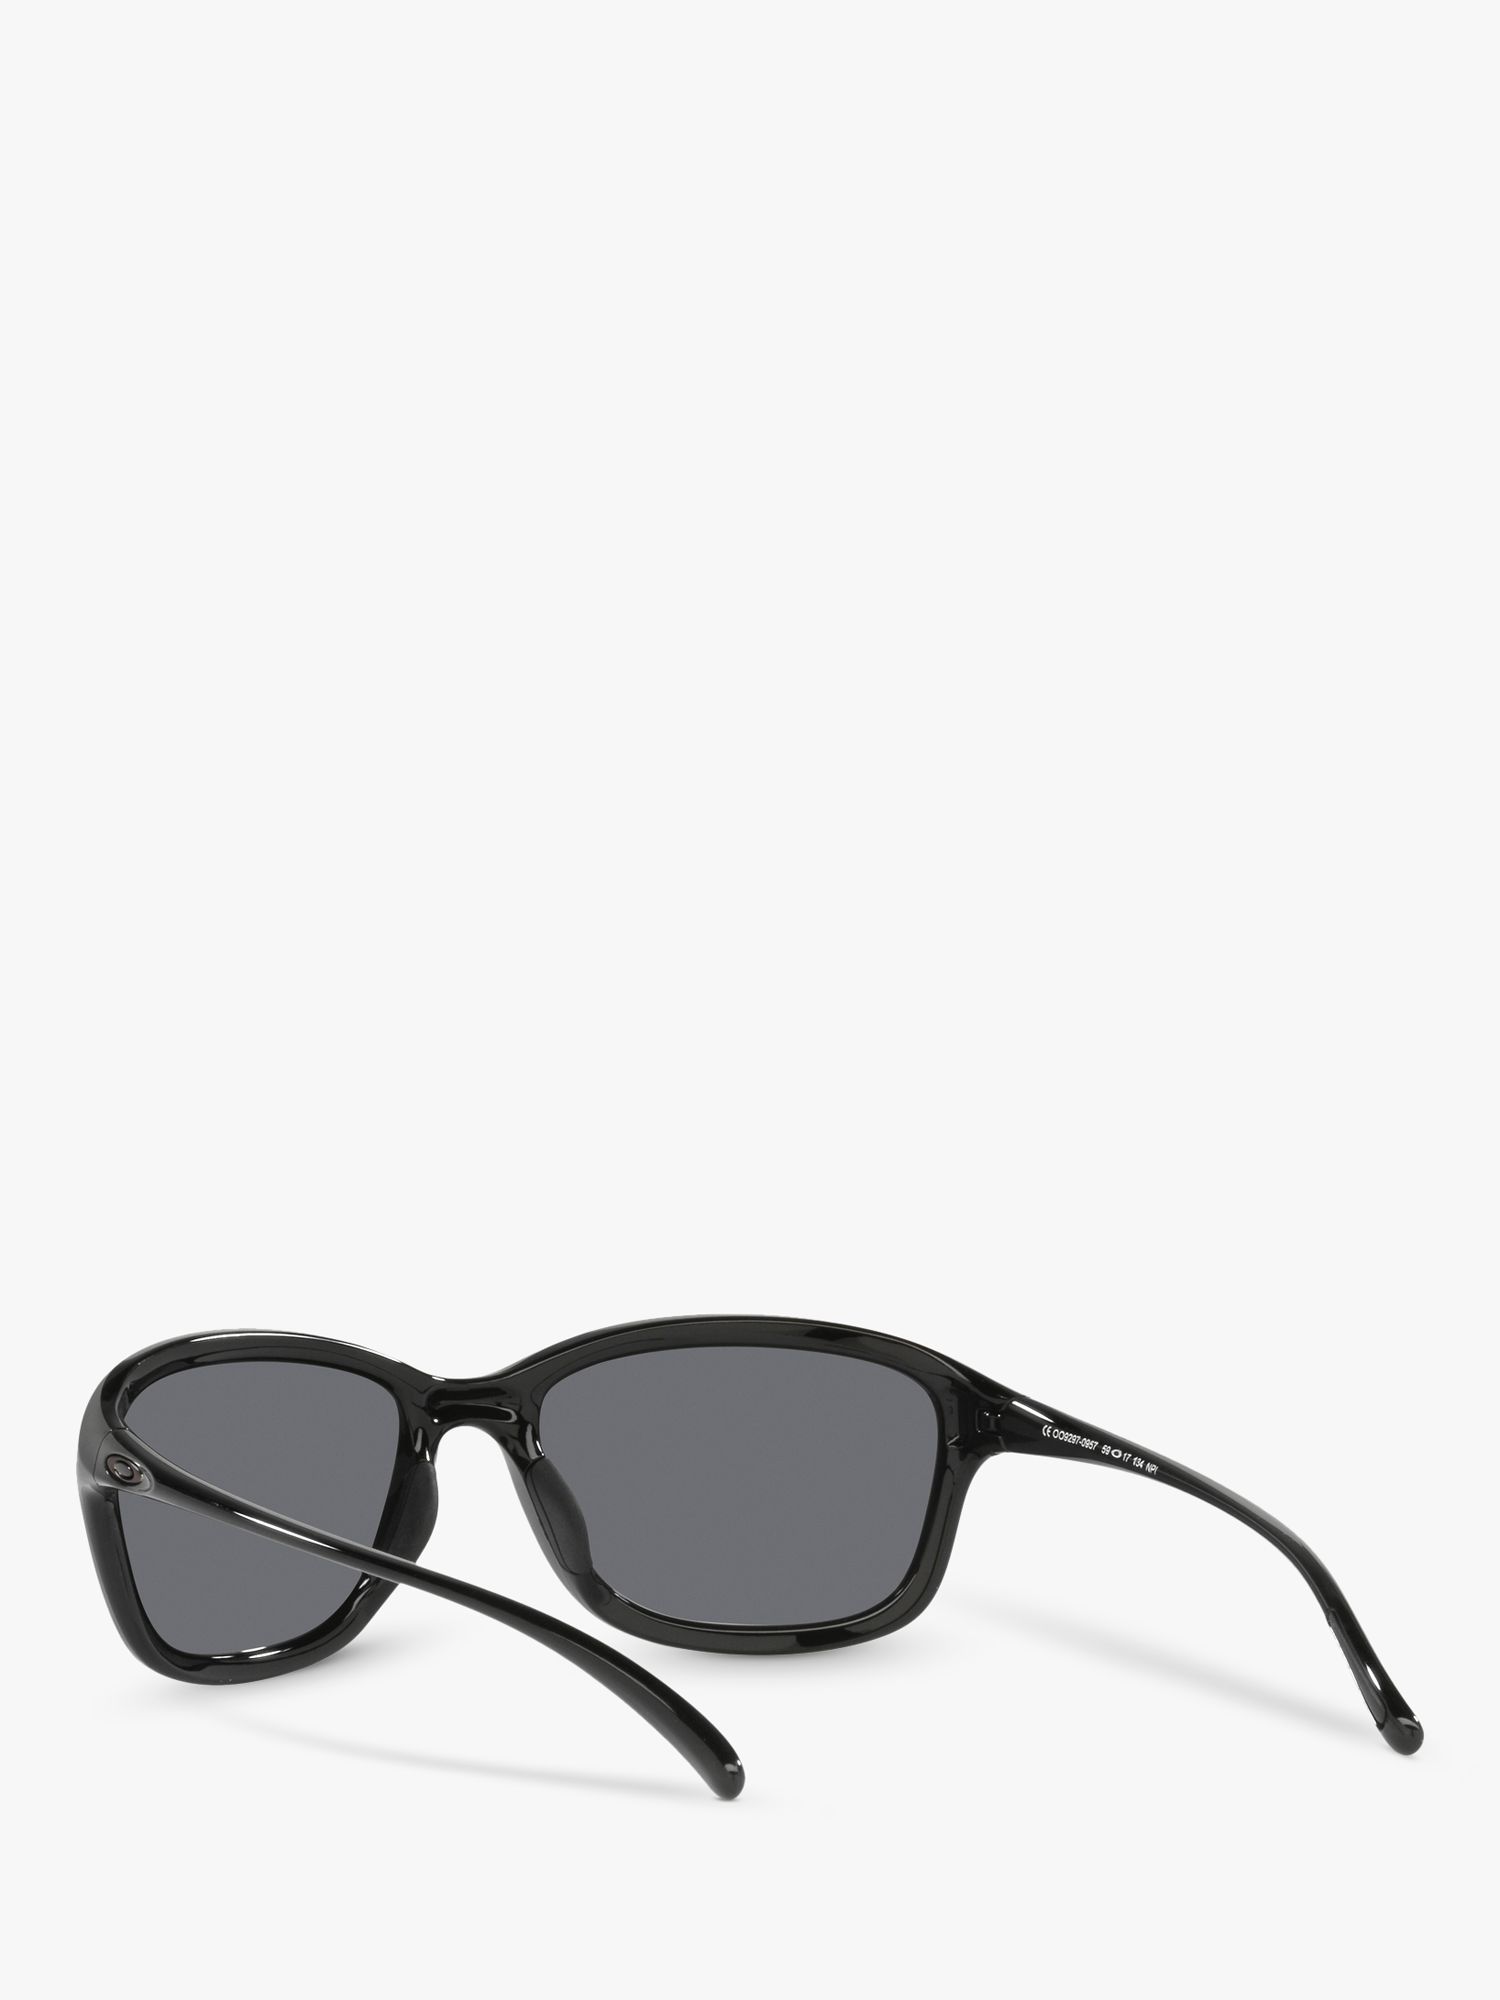 Buy Oakley OO9297 Women's She's Unstoppable Oval Sunglasses Online at johnlewis.com